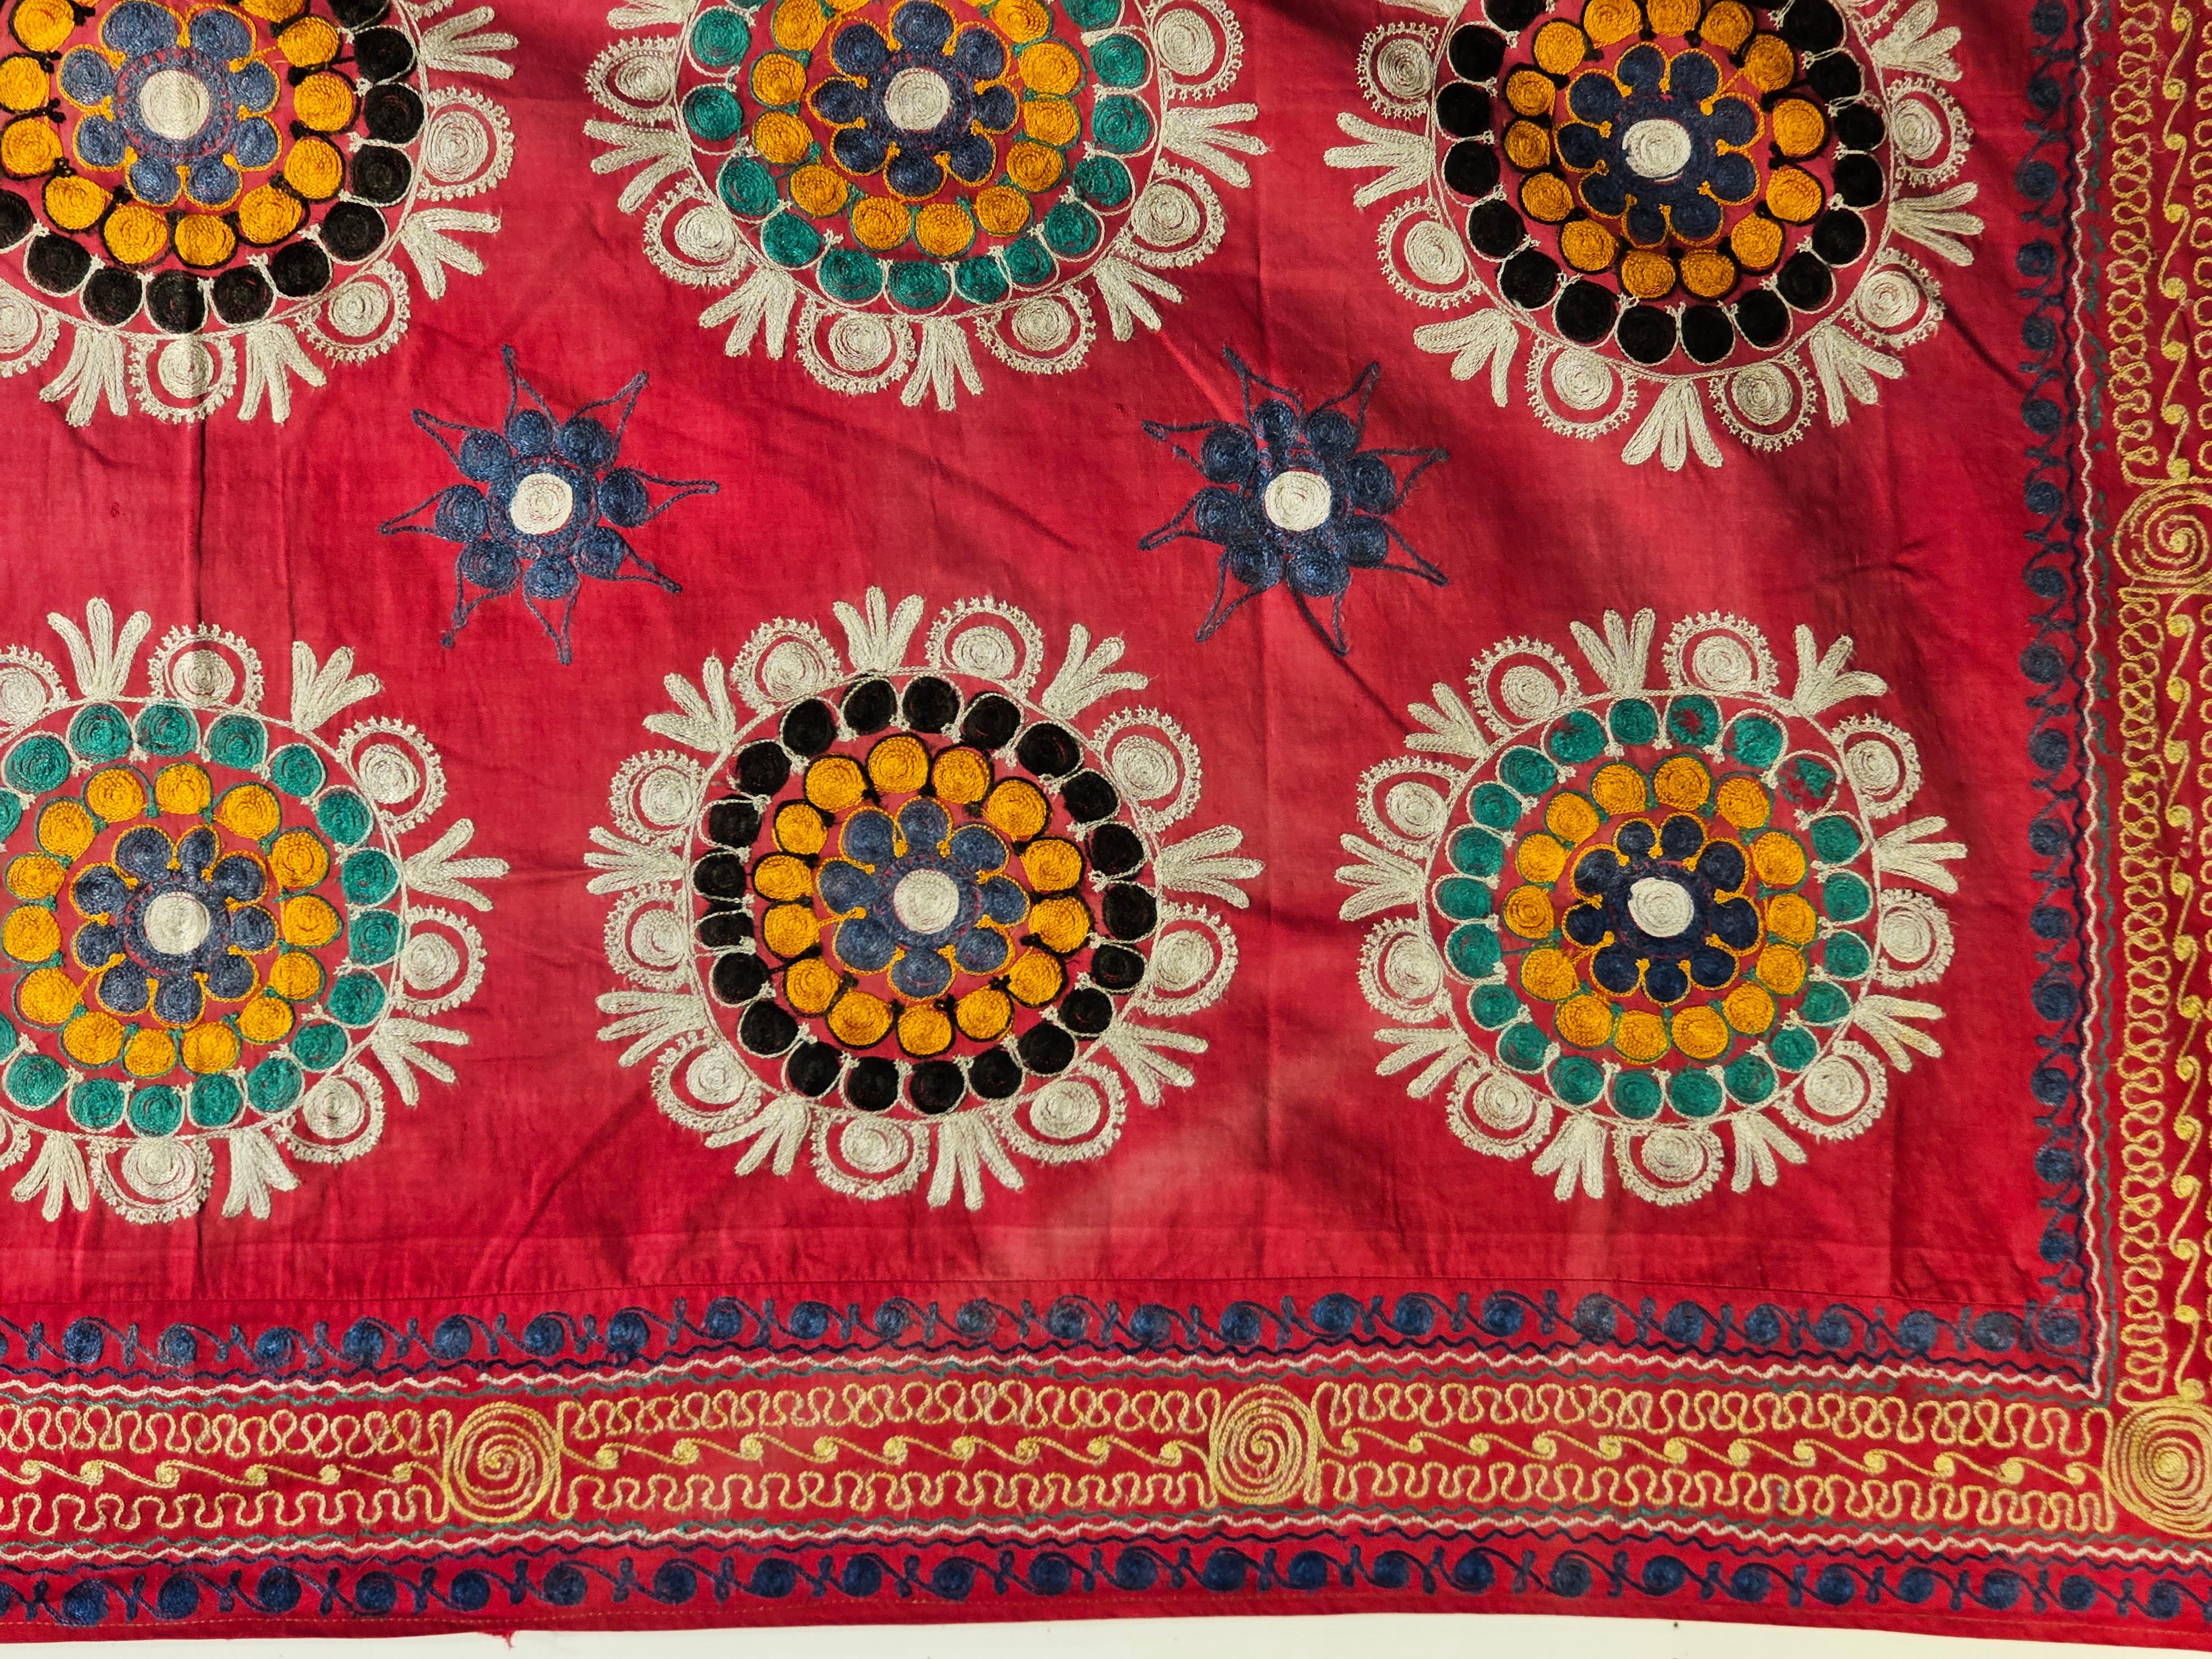 A Vintage hand crafted Silk Suzani Embroidery in medallion design from Uzbekistan in Central Asia circa the 3rd quarter of the 1900s.  This Suzani Embroidery depicts three columns of round embroidered medallions each with a different color scheme.